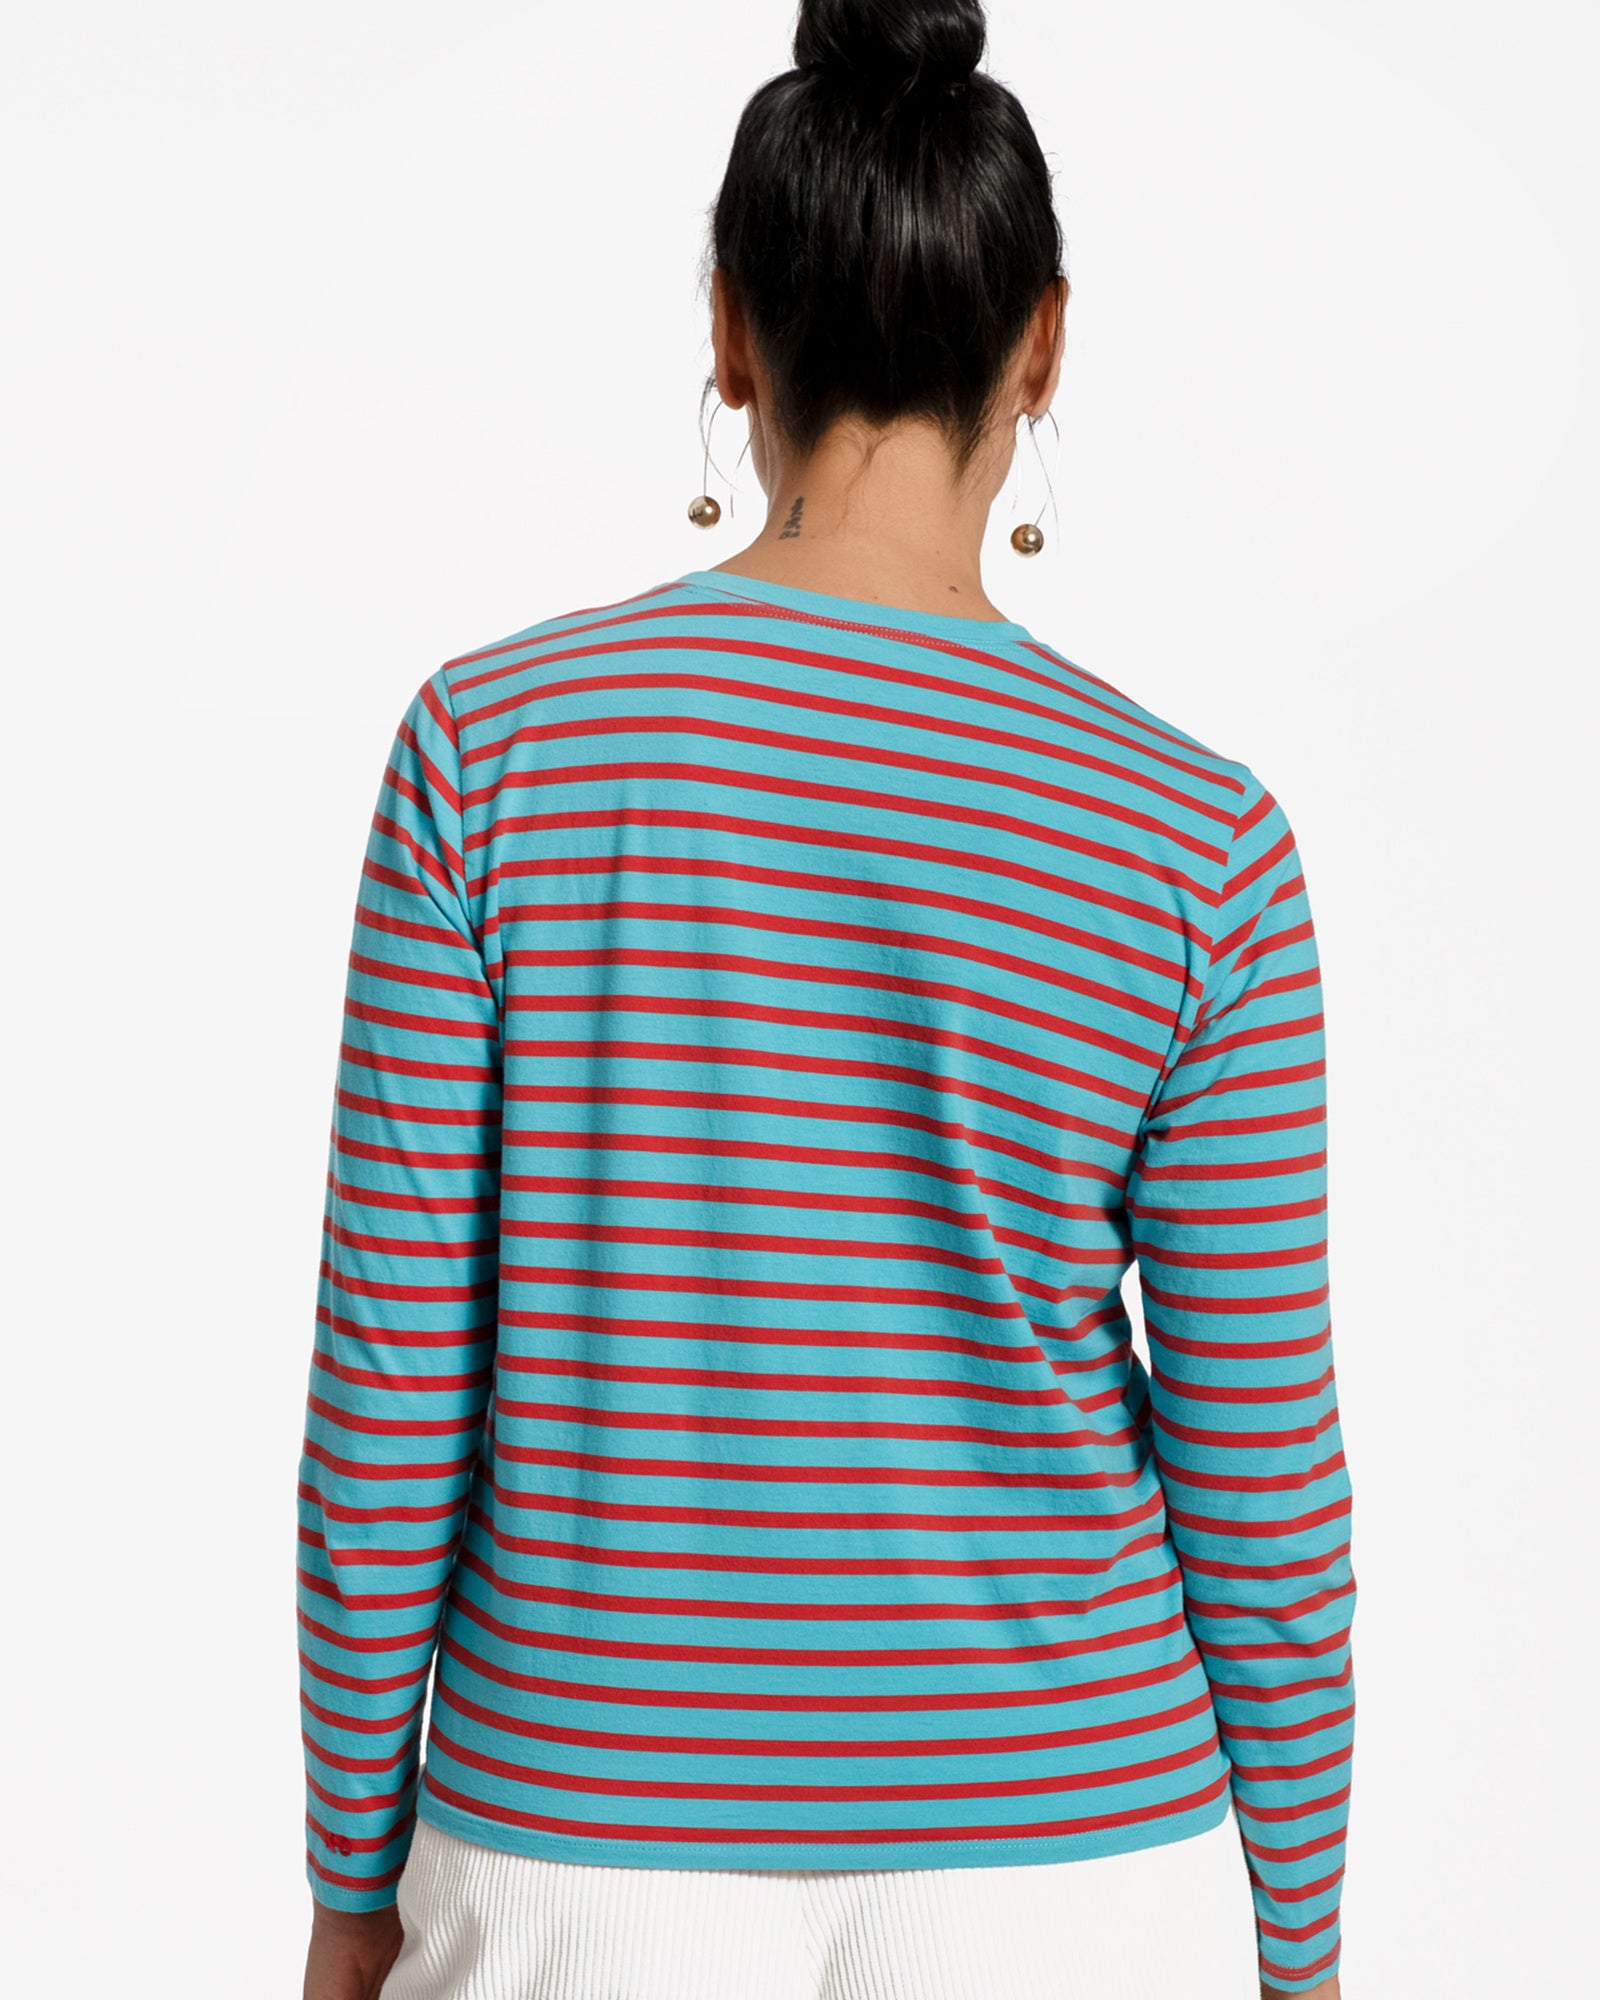 Long Sleeve Striped Tee Shirt Turquoise Red